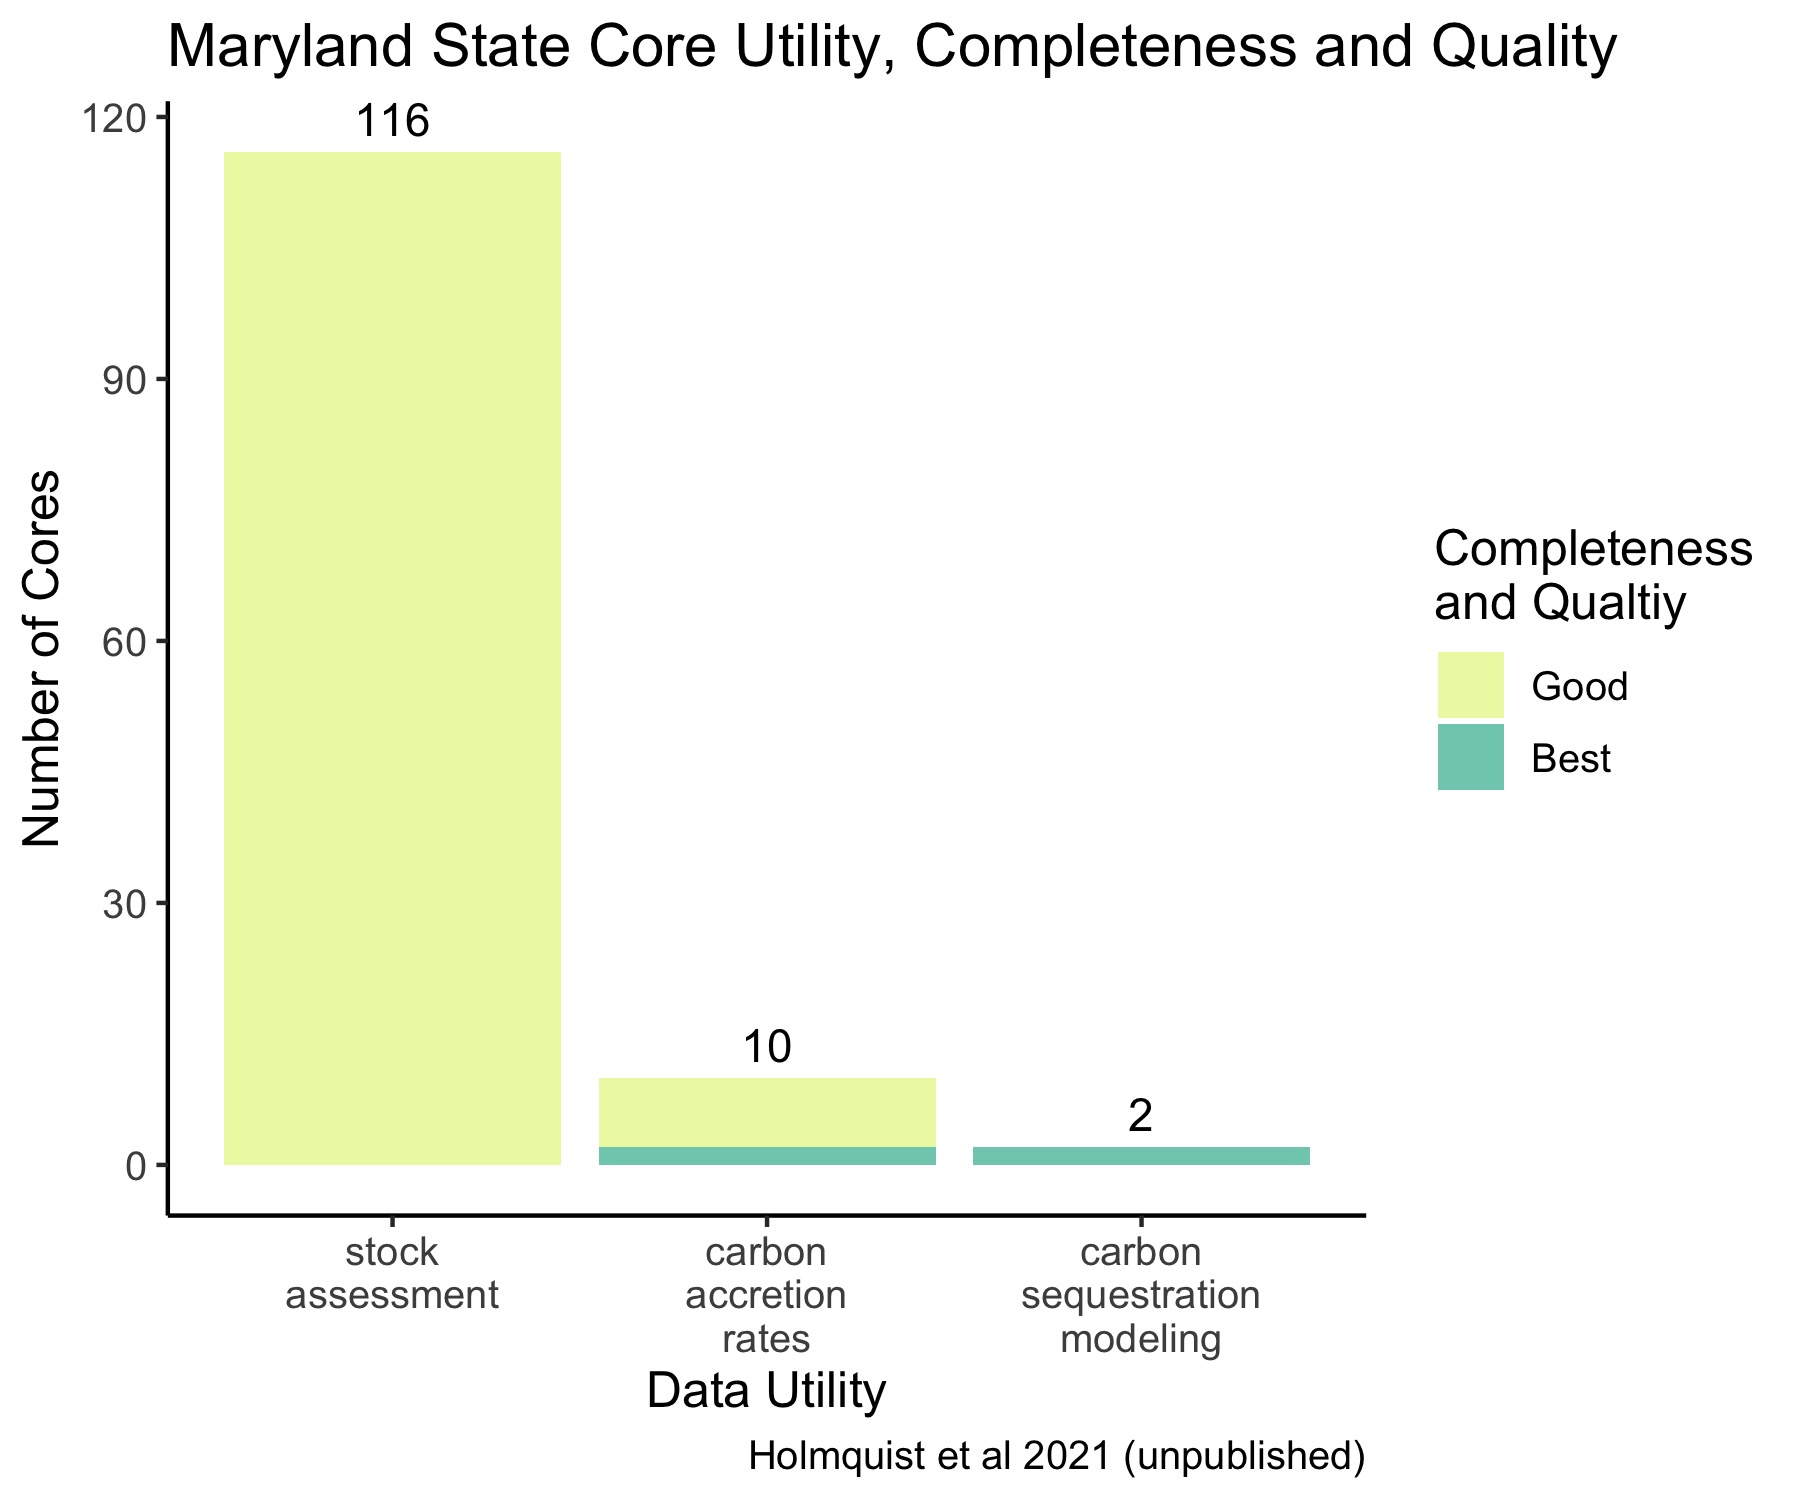 Maryland State Core Data Utility, Completeness, and Quality.